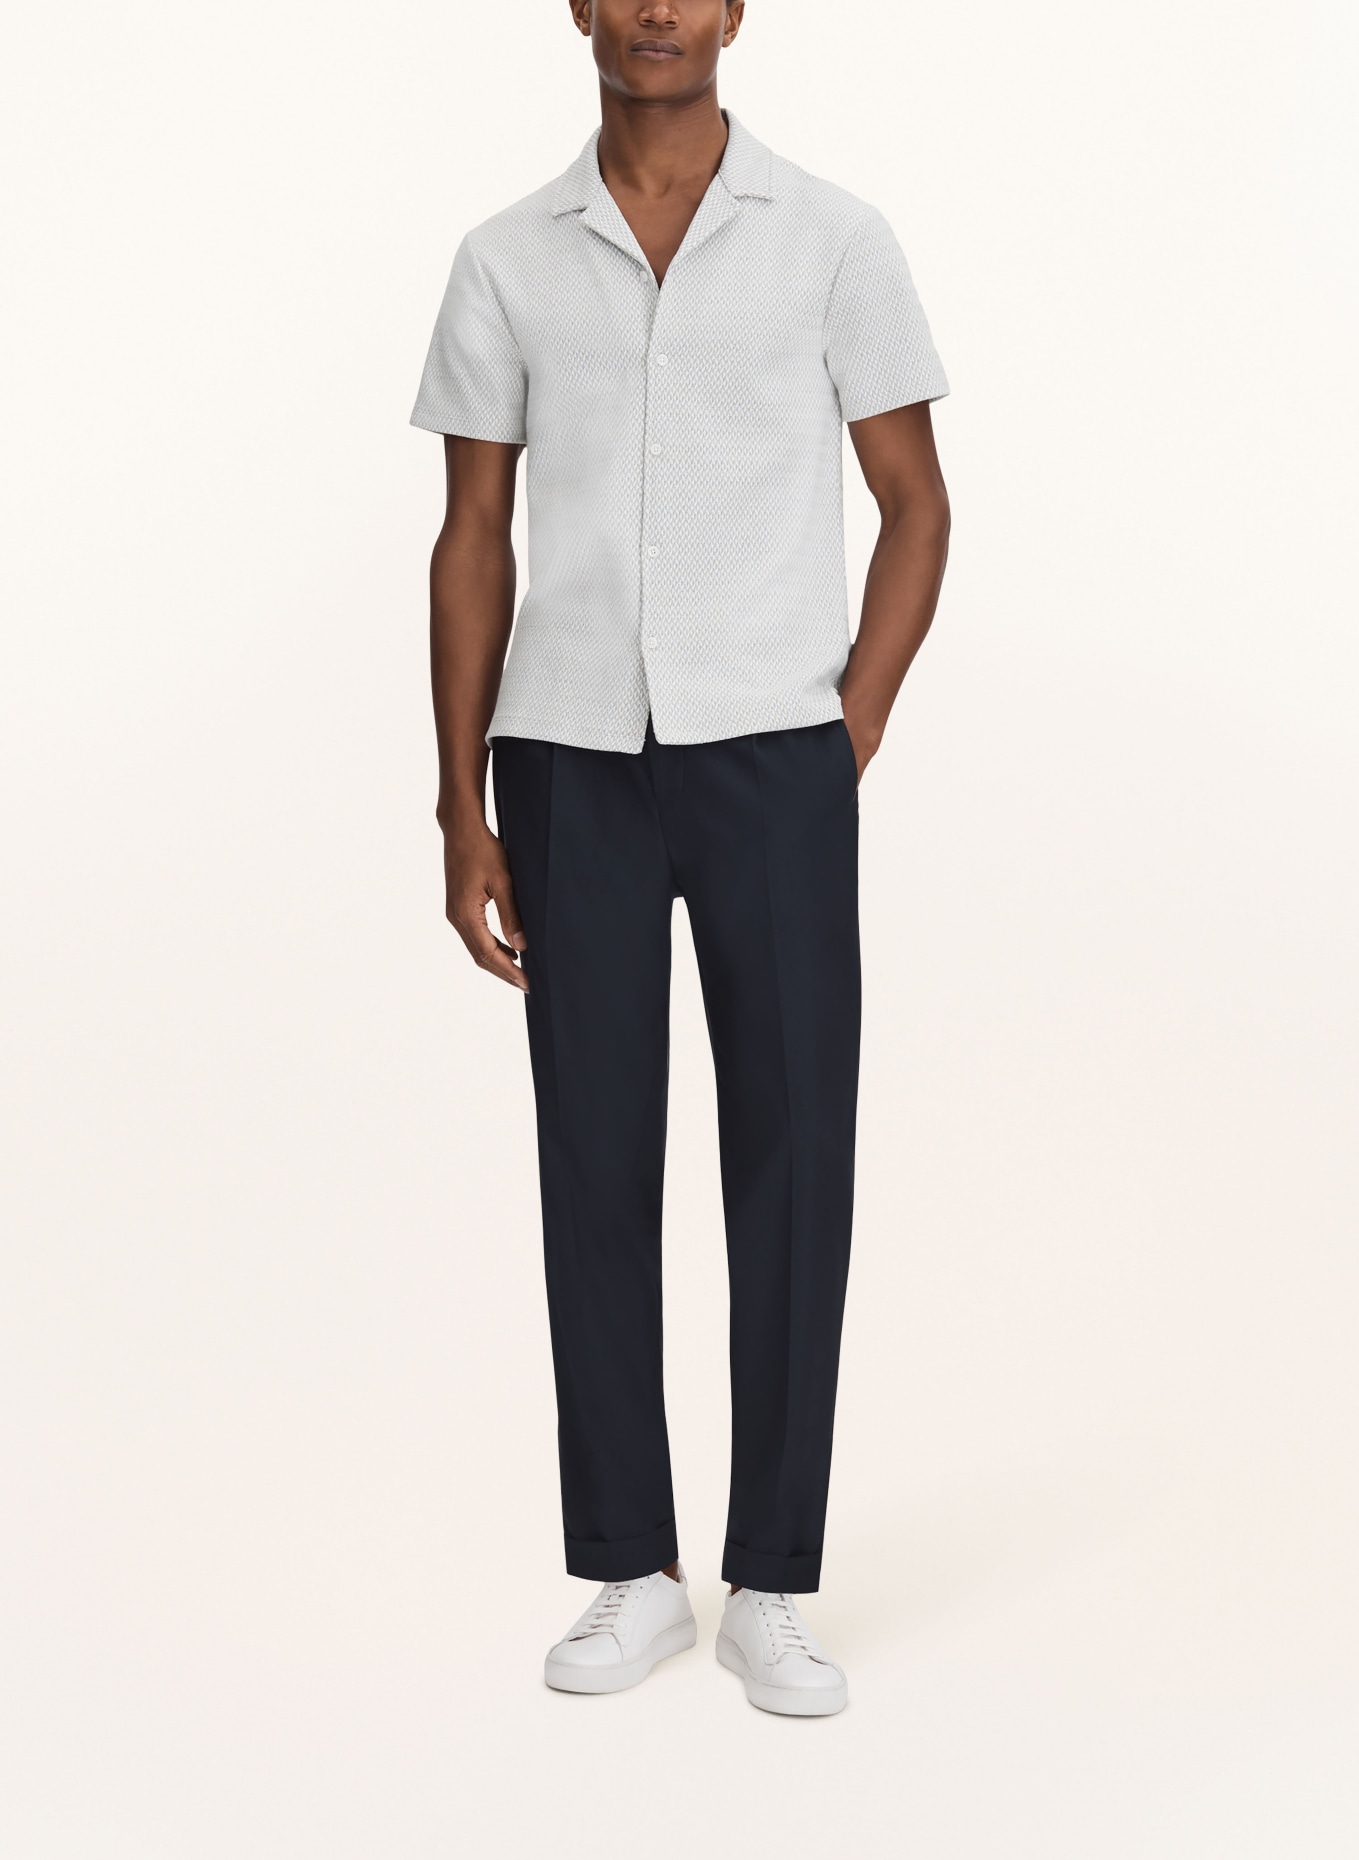 REISS Resort shirt BREWER slim fit in jersey, Color: LIGHT GRAY/ WHITE (Image 2)